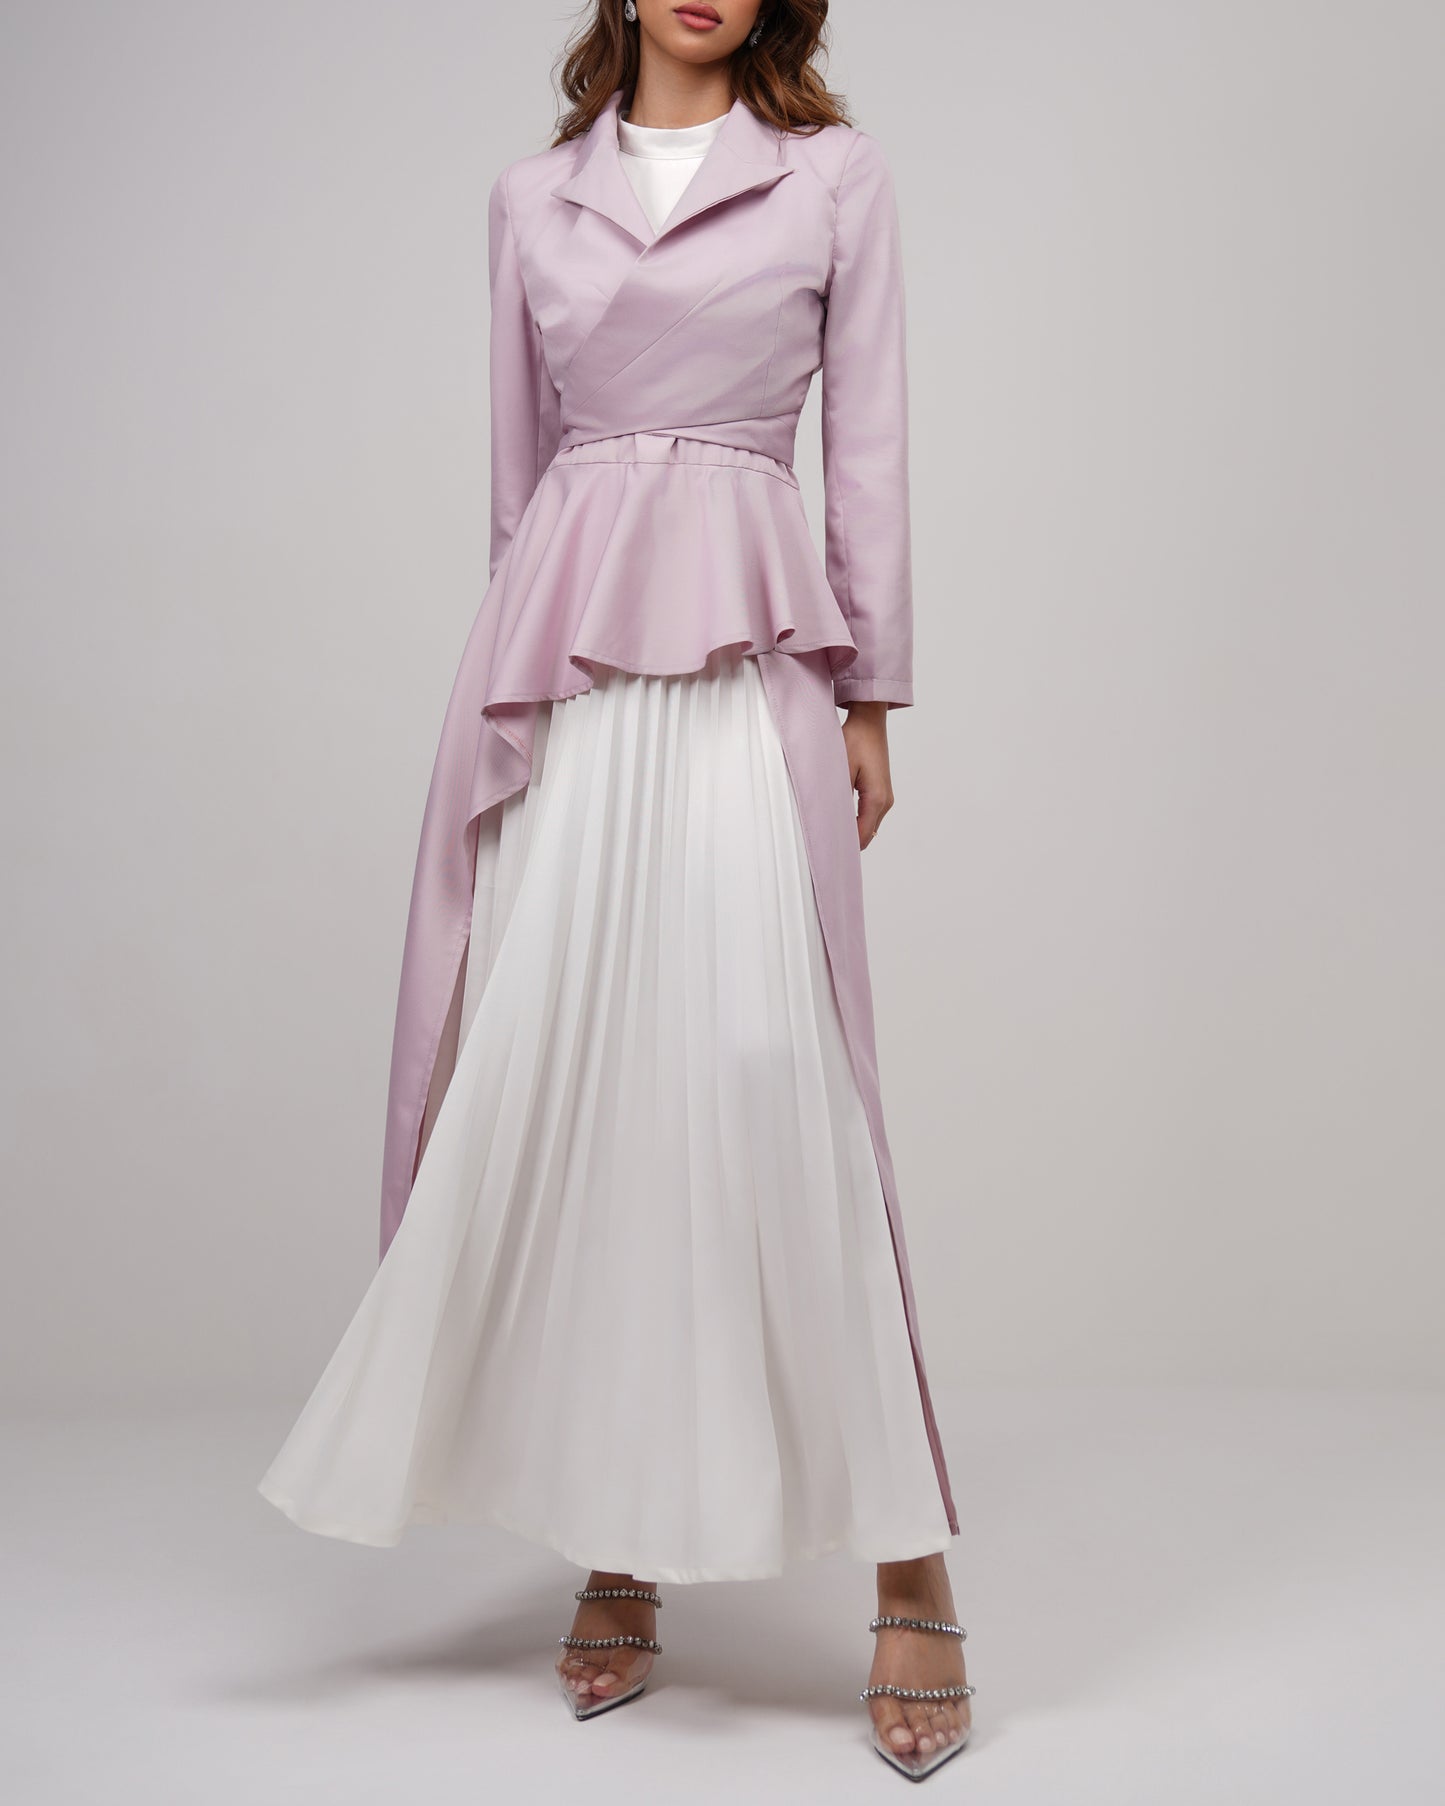 Cotton candy pleated detail dress and cropped tie blazer set